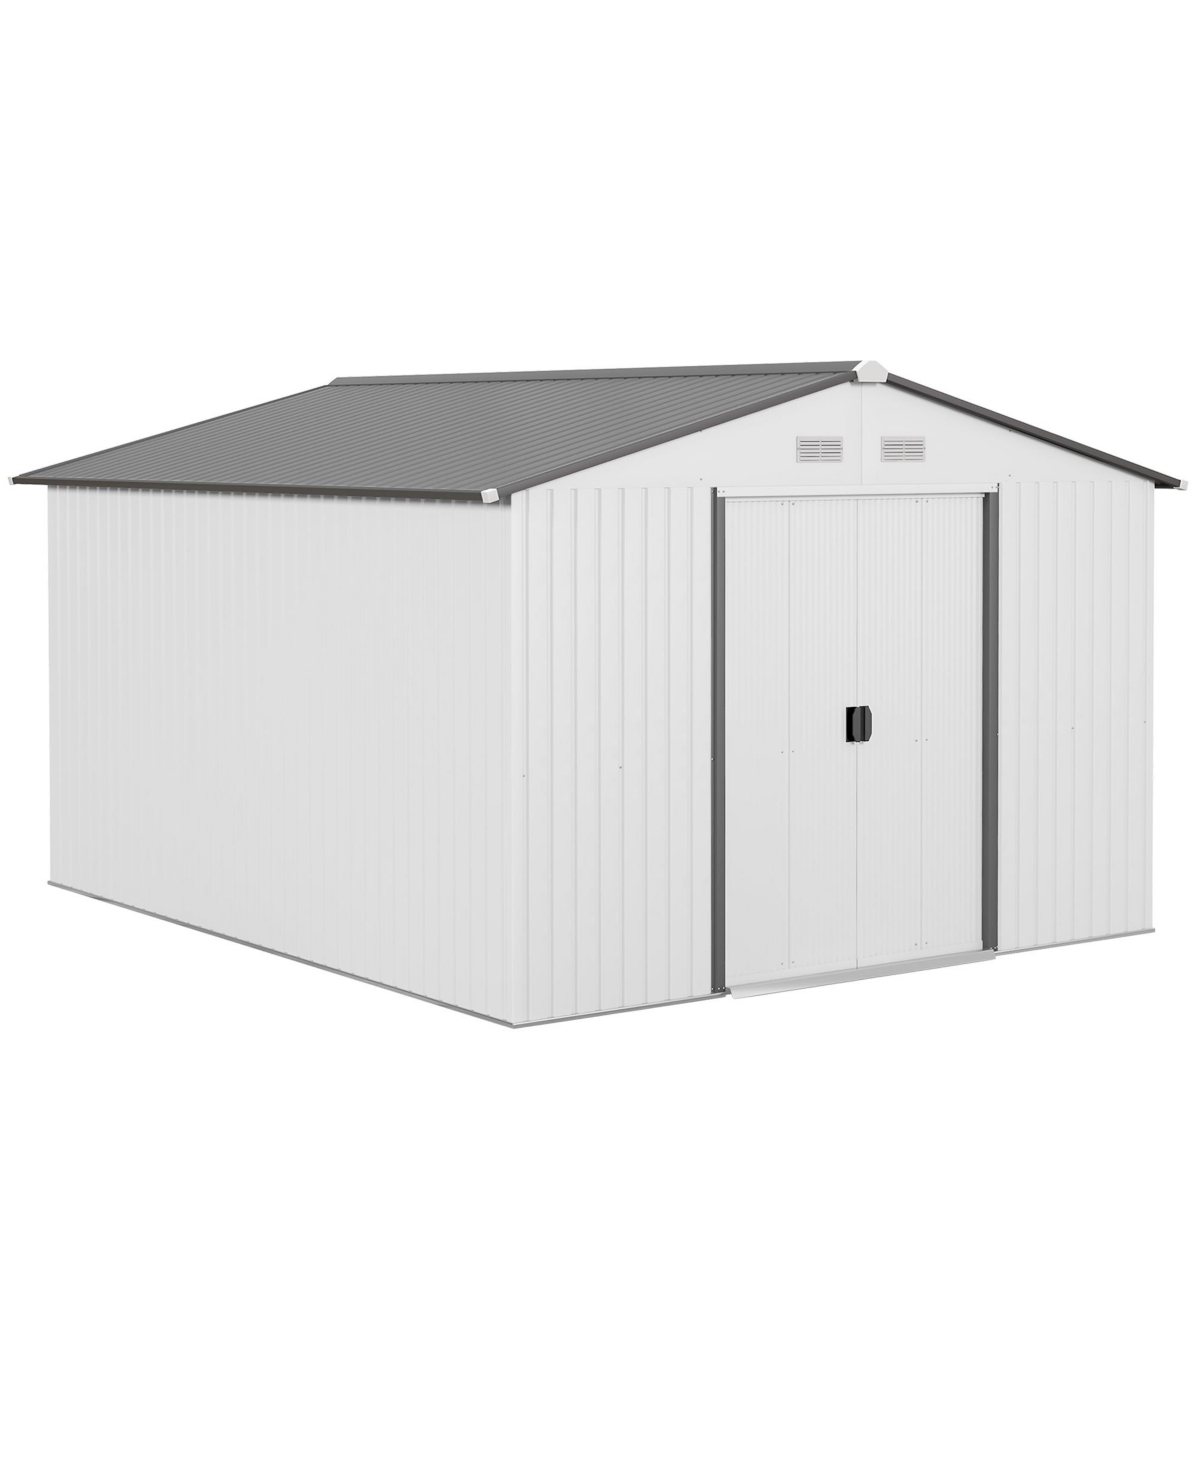 11' x 9' Steel Outdoor Utility Storage Tool Shed Kit for Backyard Garden, Silver - Silver